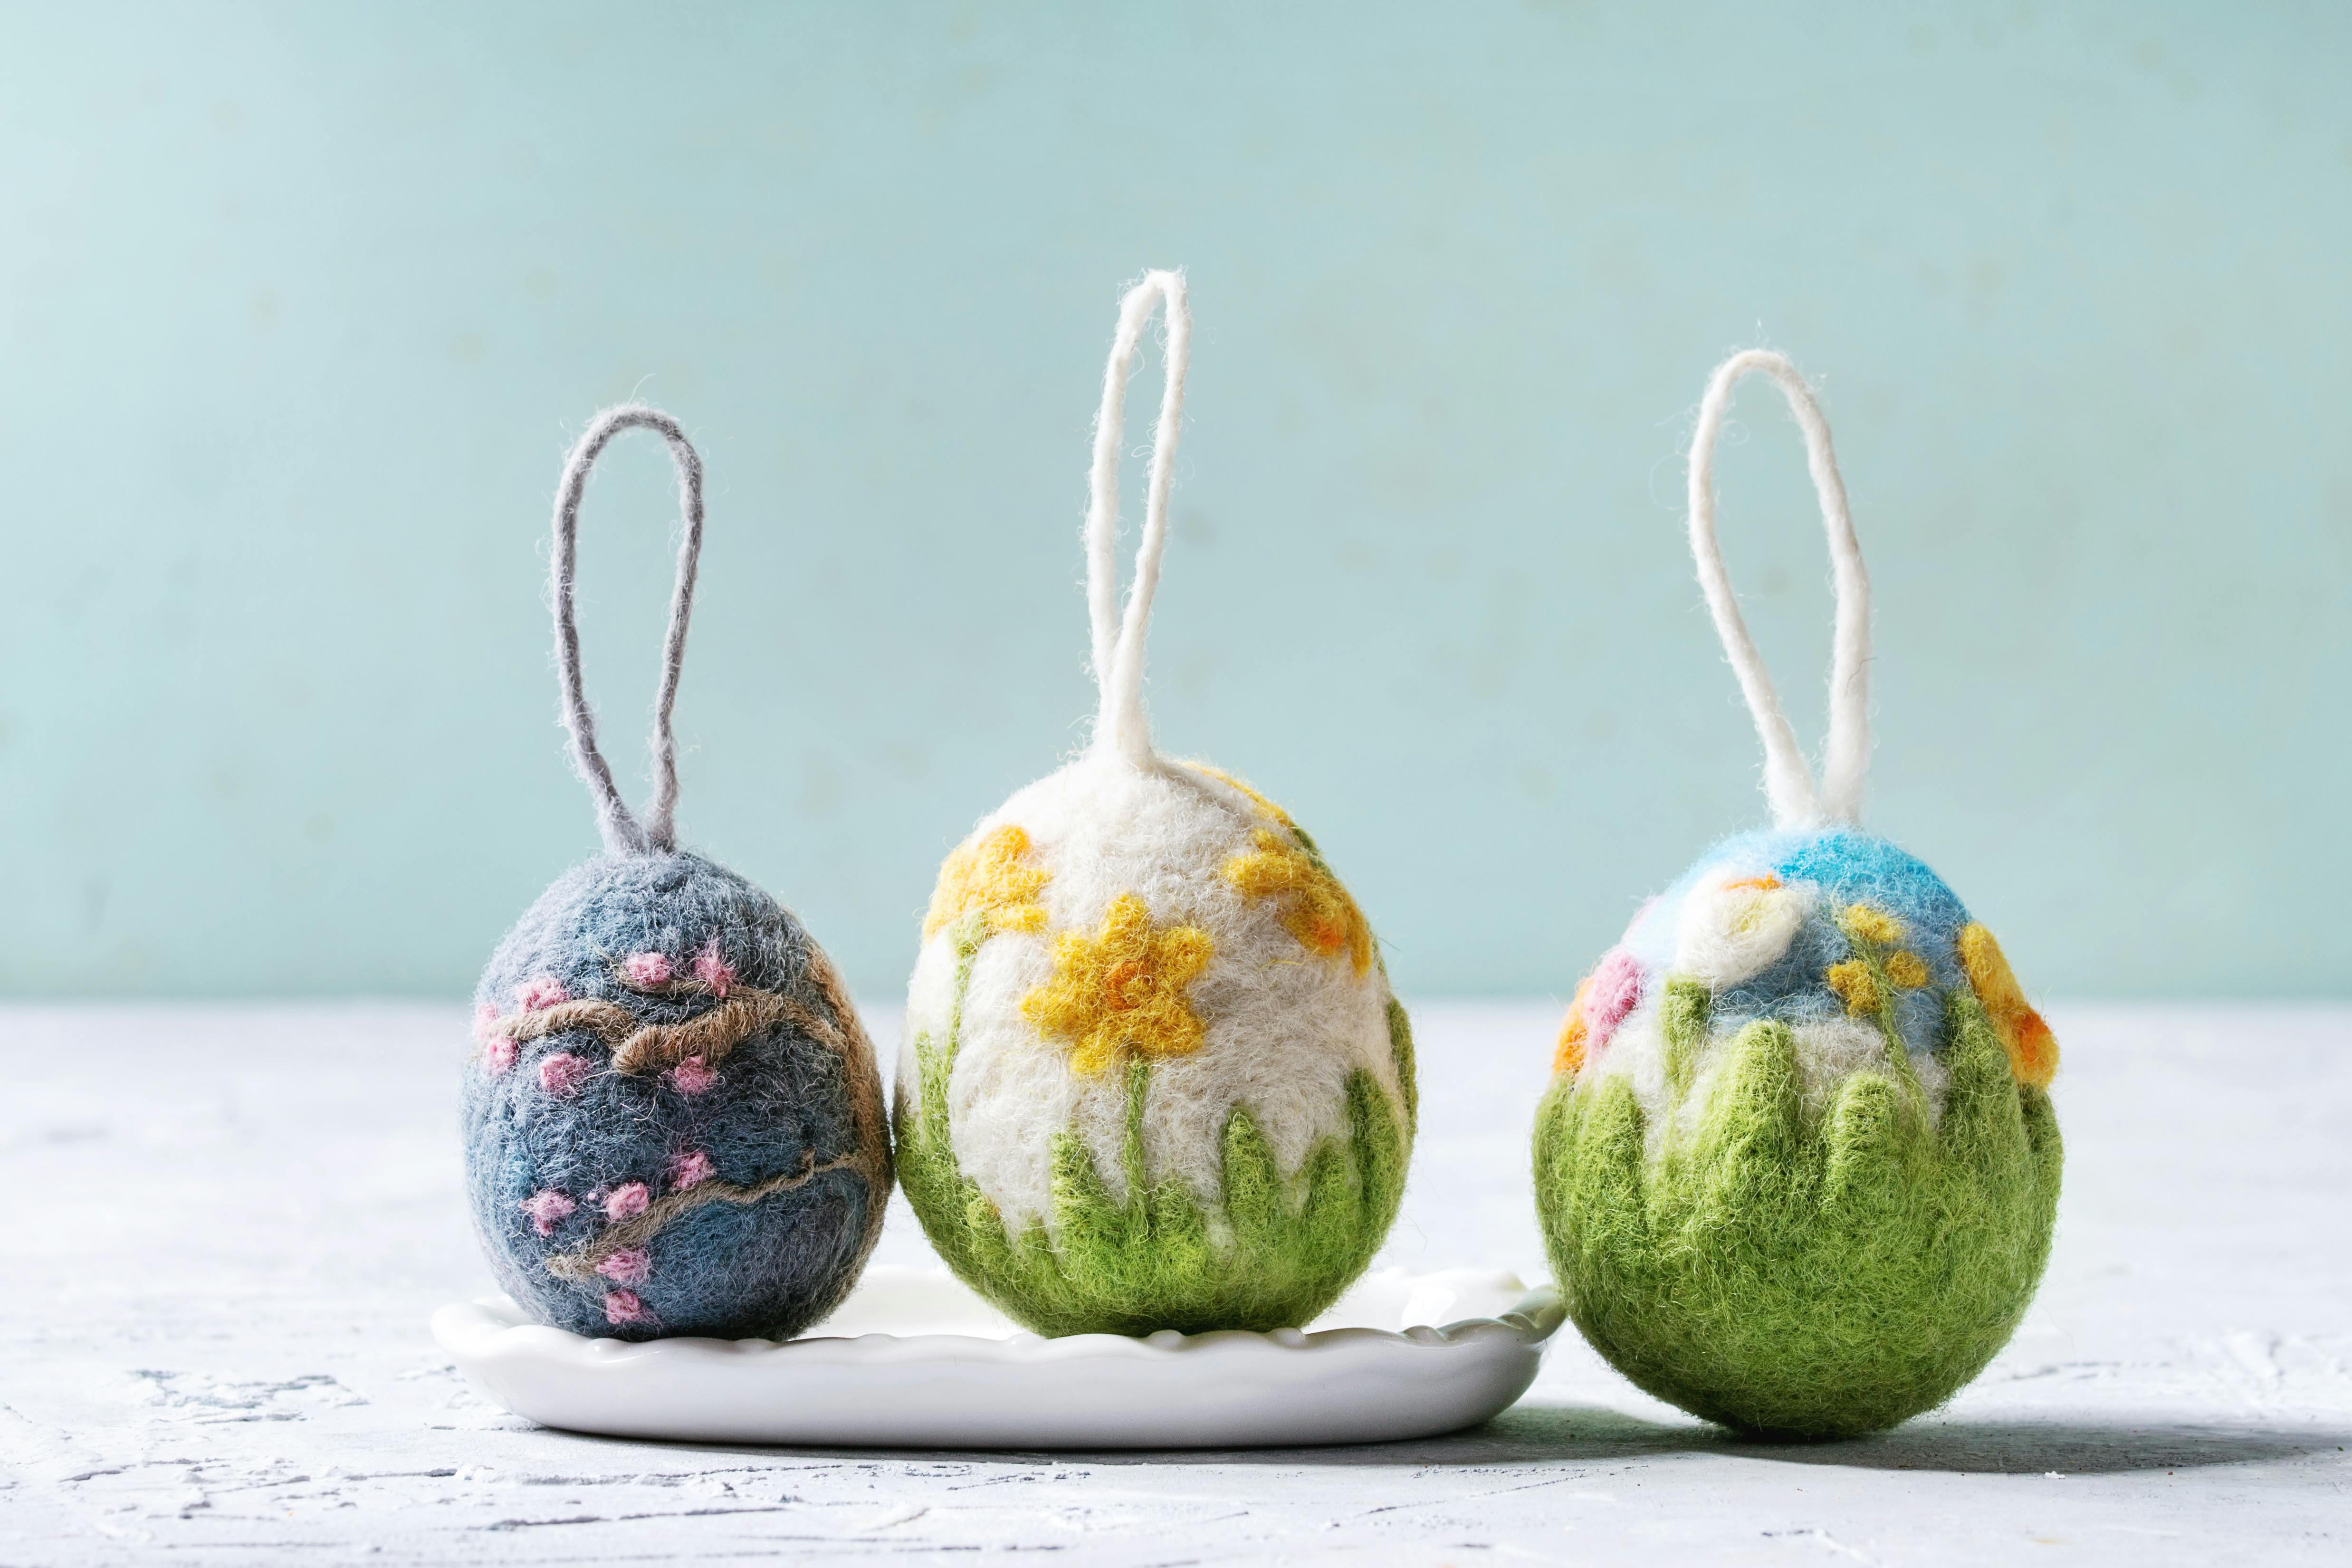  wool felt eggs with floral decorations